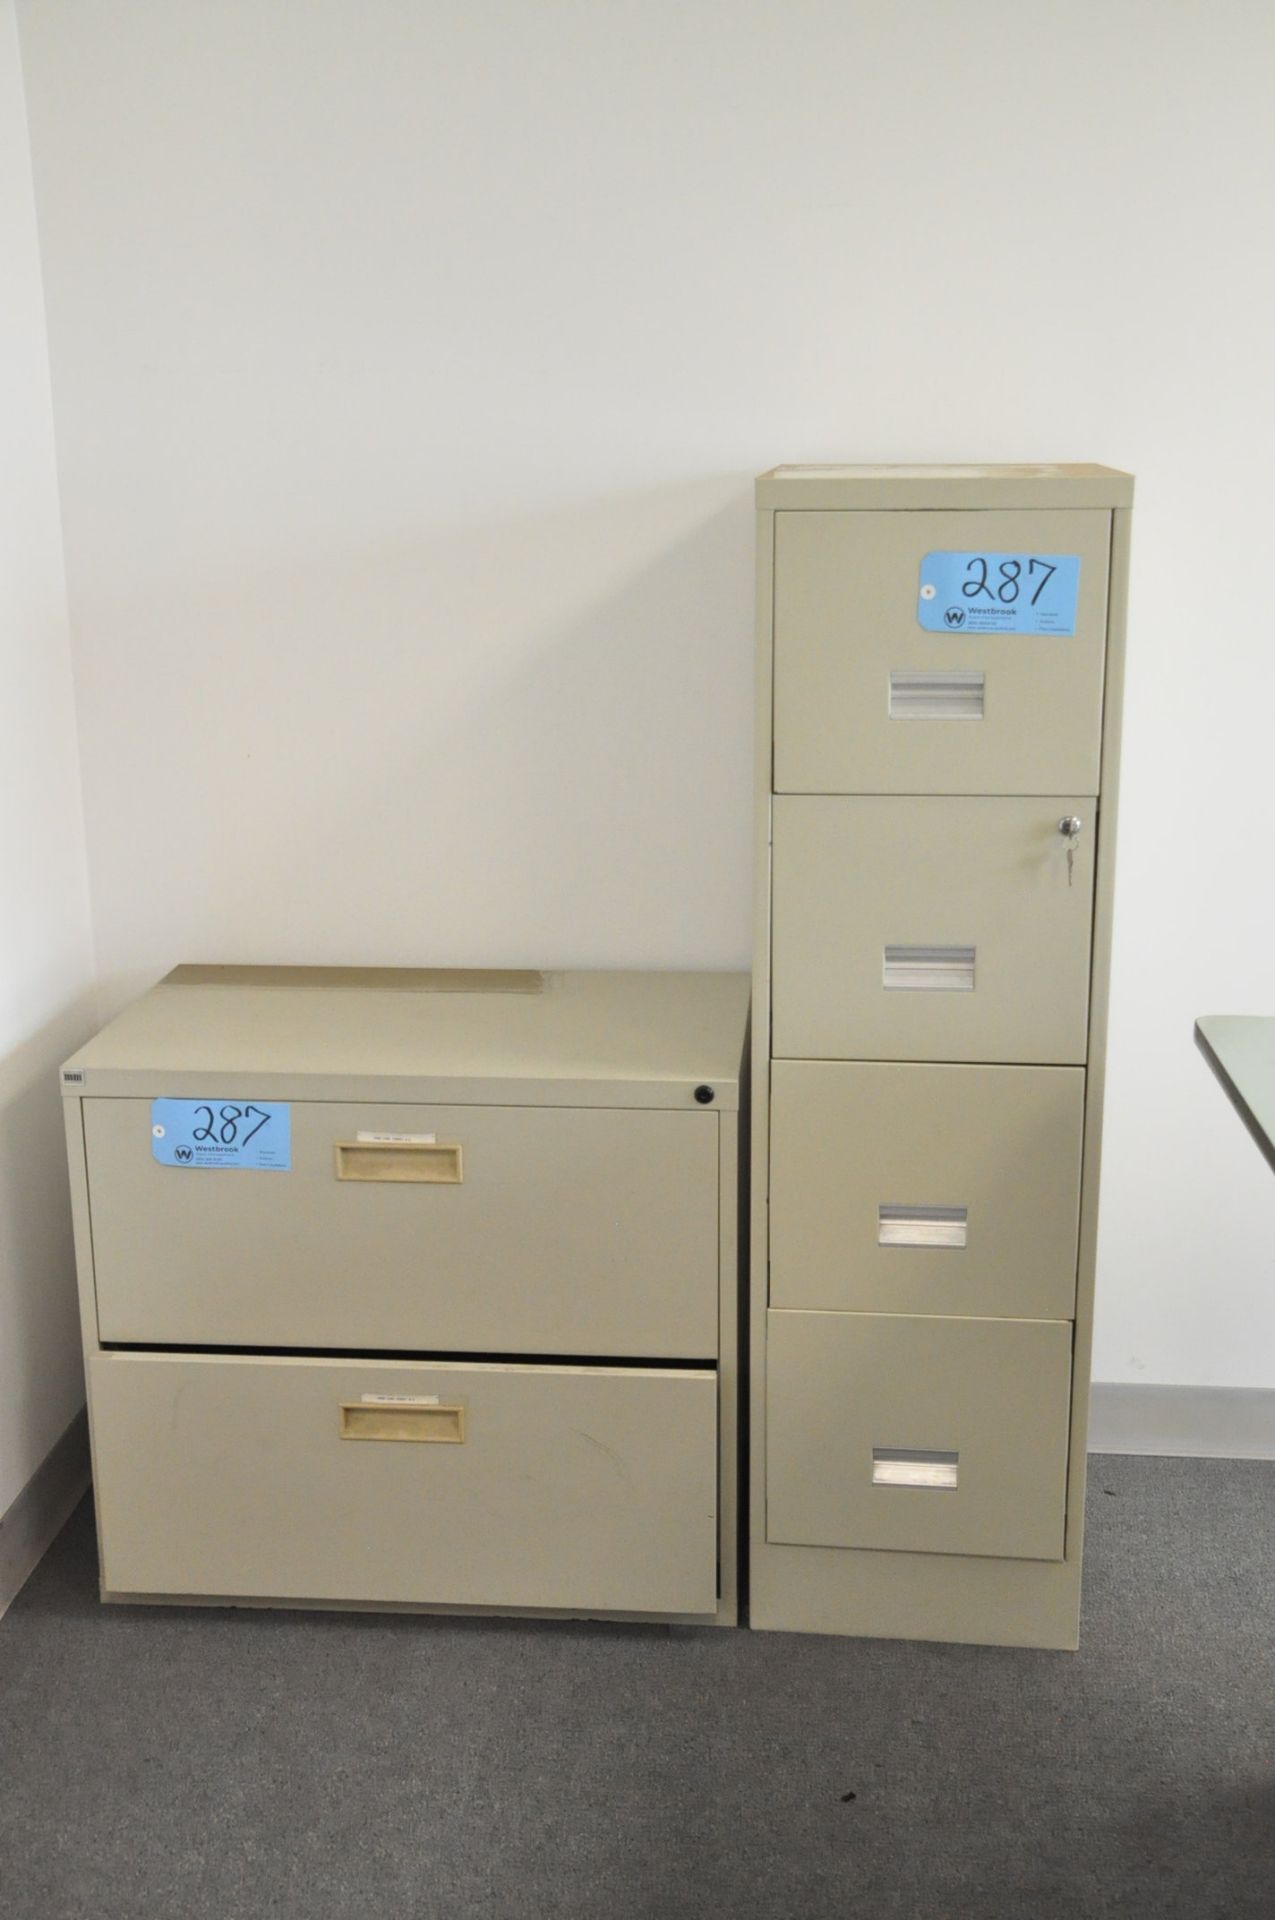 Lot-Desk with 2-Drawer Lateral File Cabinet 4-Drawer Vertical File Cabinet in (1) Office - Image 2 of 3